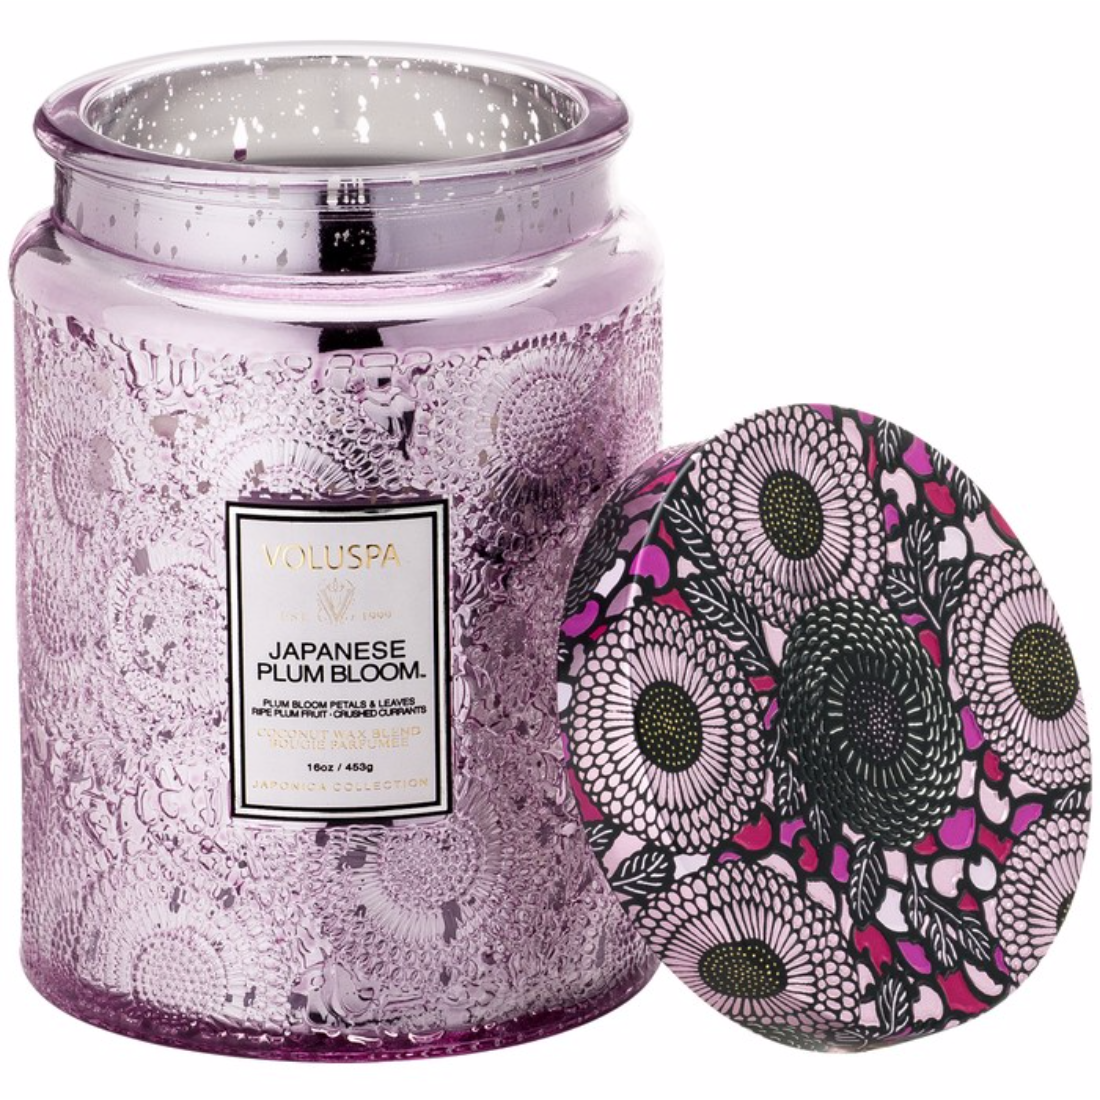 Voluspa Large Embossed Glass Candle - Japanese Plum Bloom Poured in California - Zinnias Gift Boutique